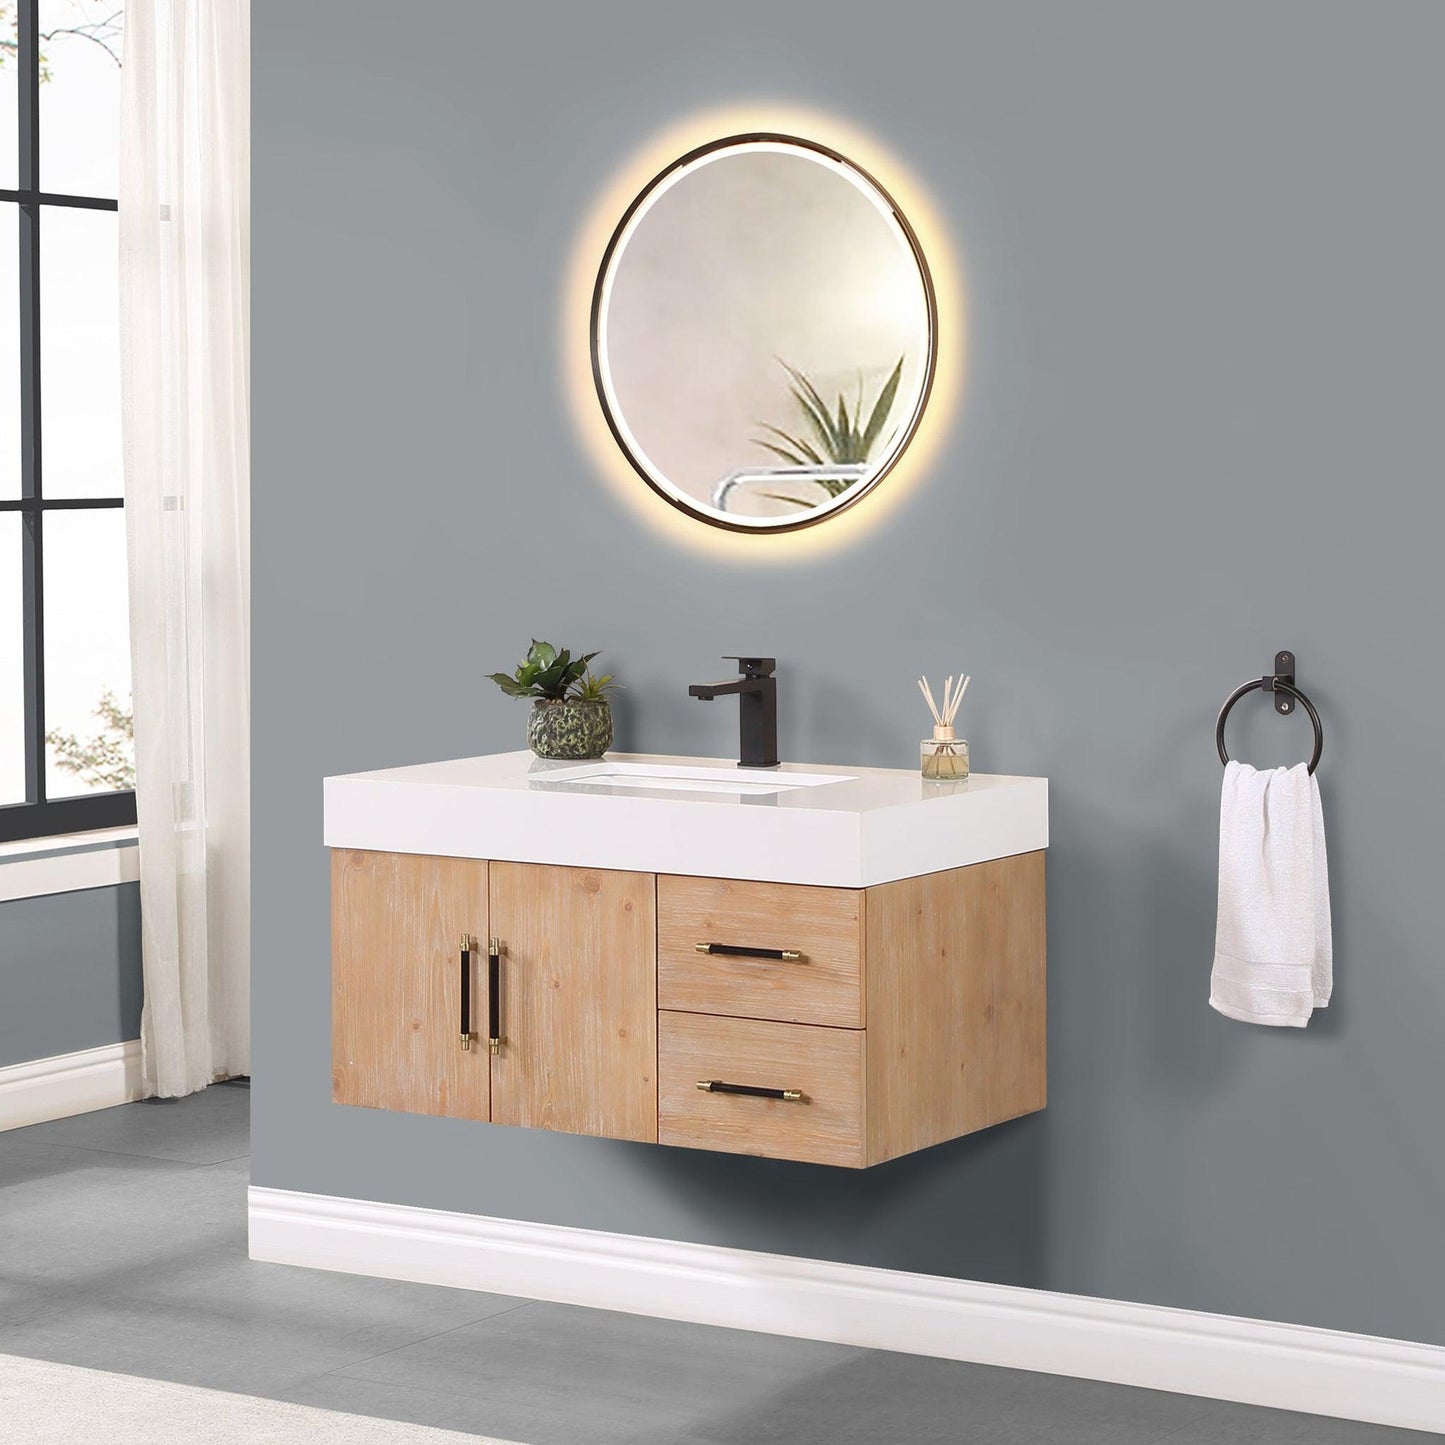 Altair Corchia 36" Light Brown Wall-Mounted Single Bathroom Vanity Set With Mirror, White Composite Stone Top, Single Rectangular Undermount Ceramic Sink, and Overflow